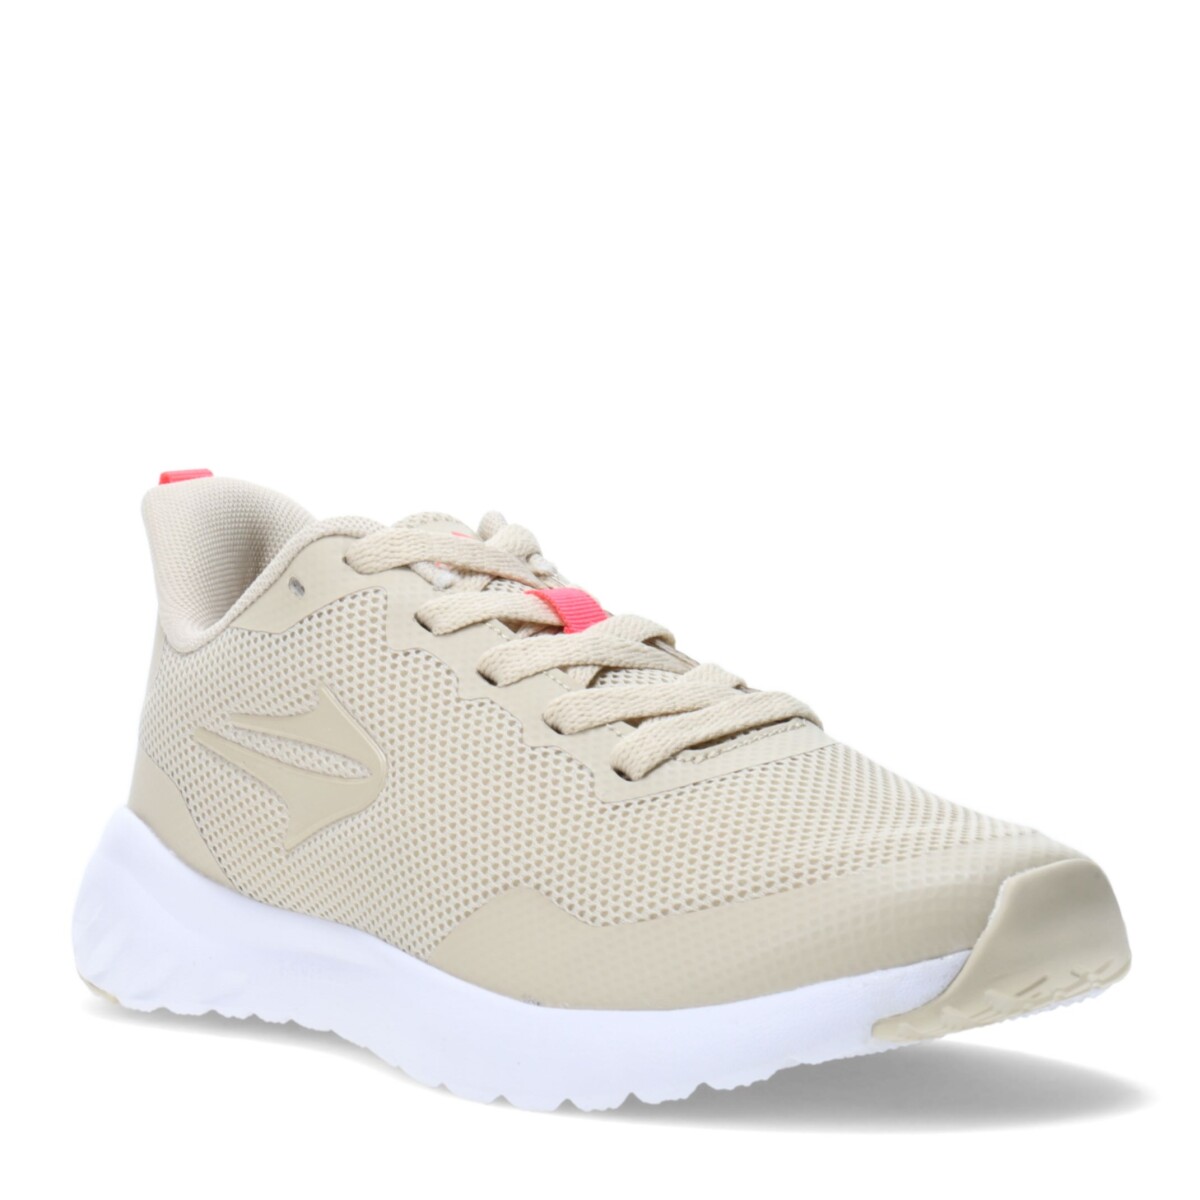 Championes de Mujer Topper Strong Pace III - Beige - Fucsia 